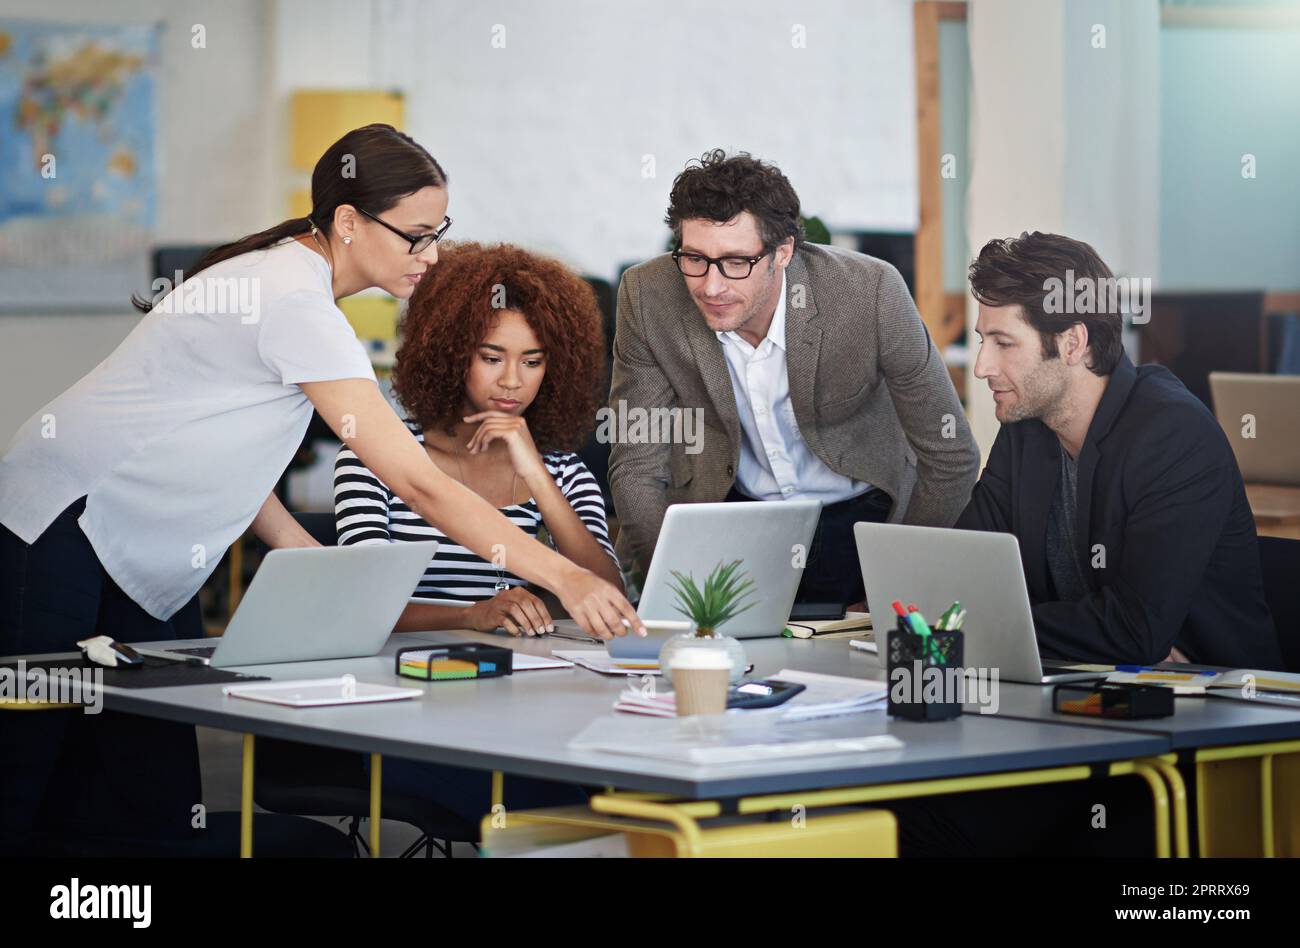 Theyre innovators in the biz. designers talking together over laptops in an office. Stock Photo